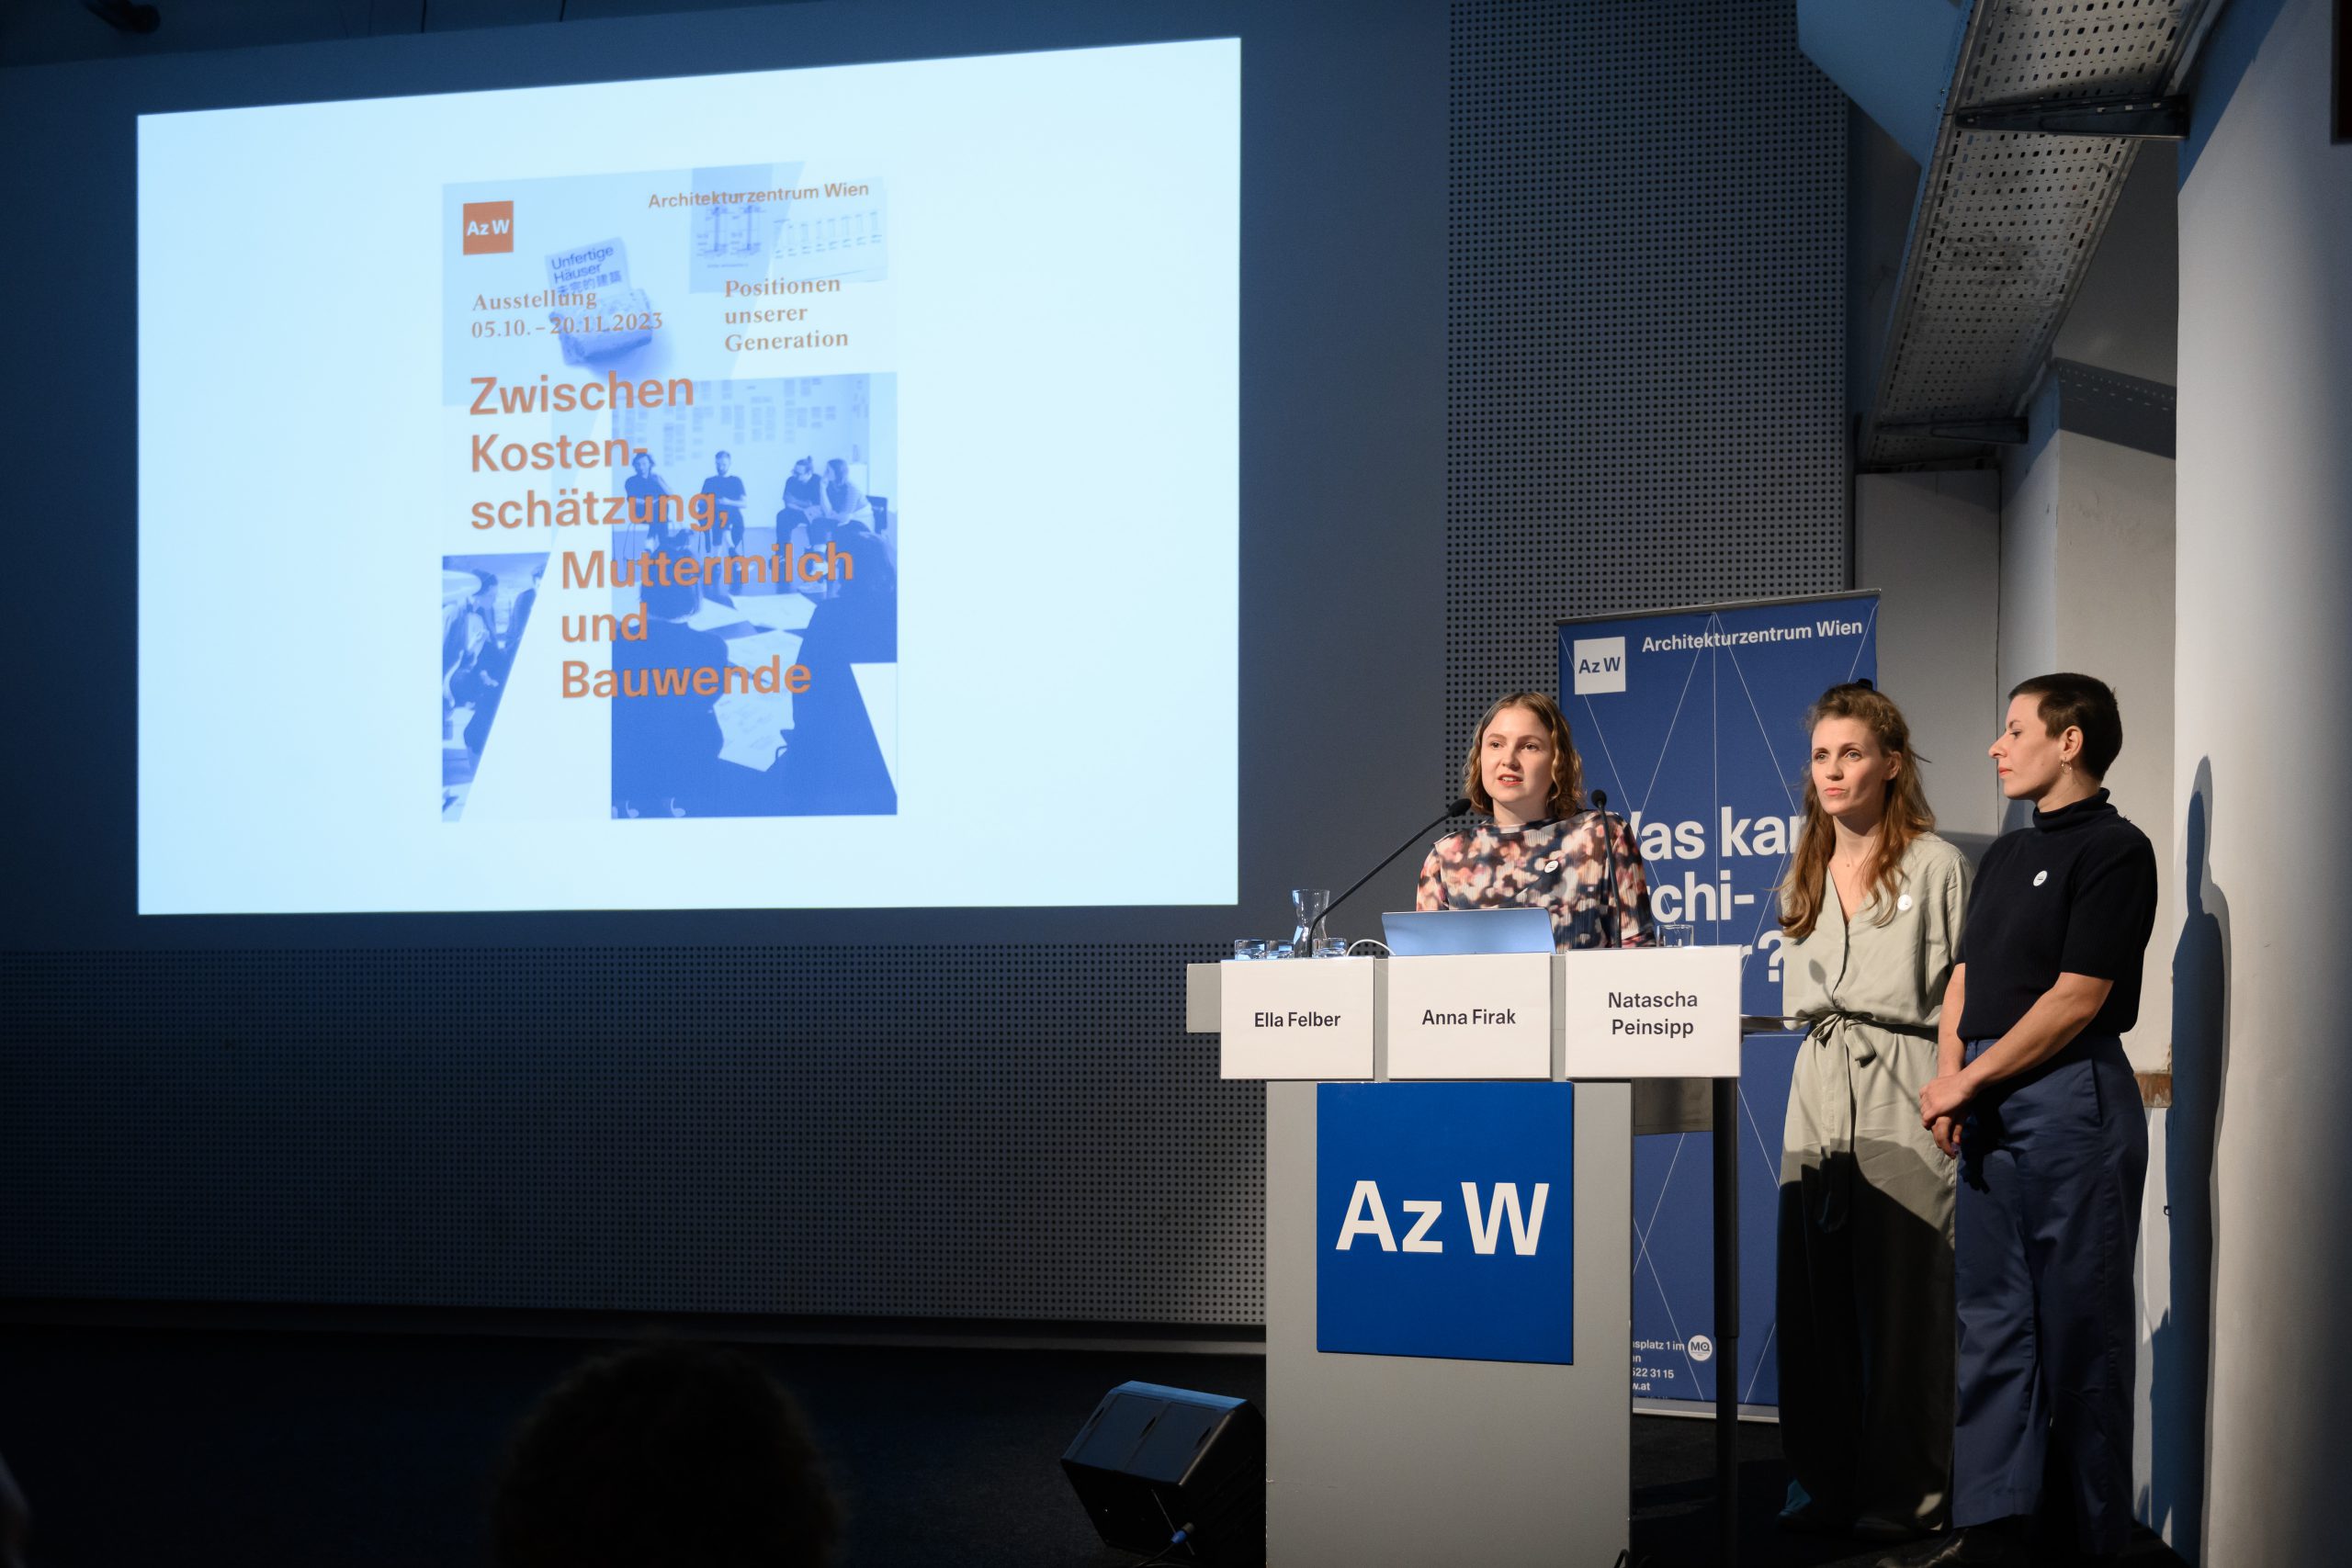 3 women in front of a lectern in a darkened room, on the lectern is Az W on blue square